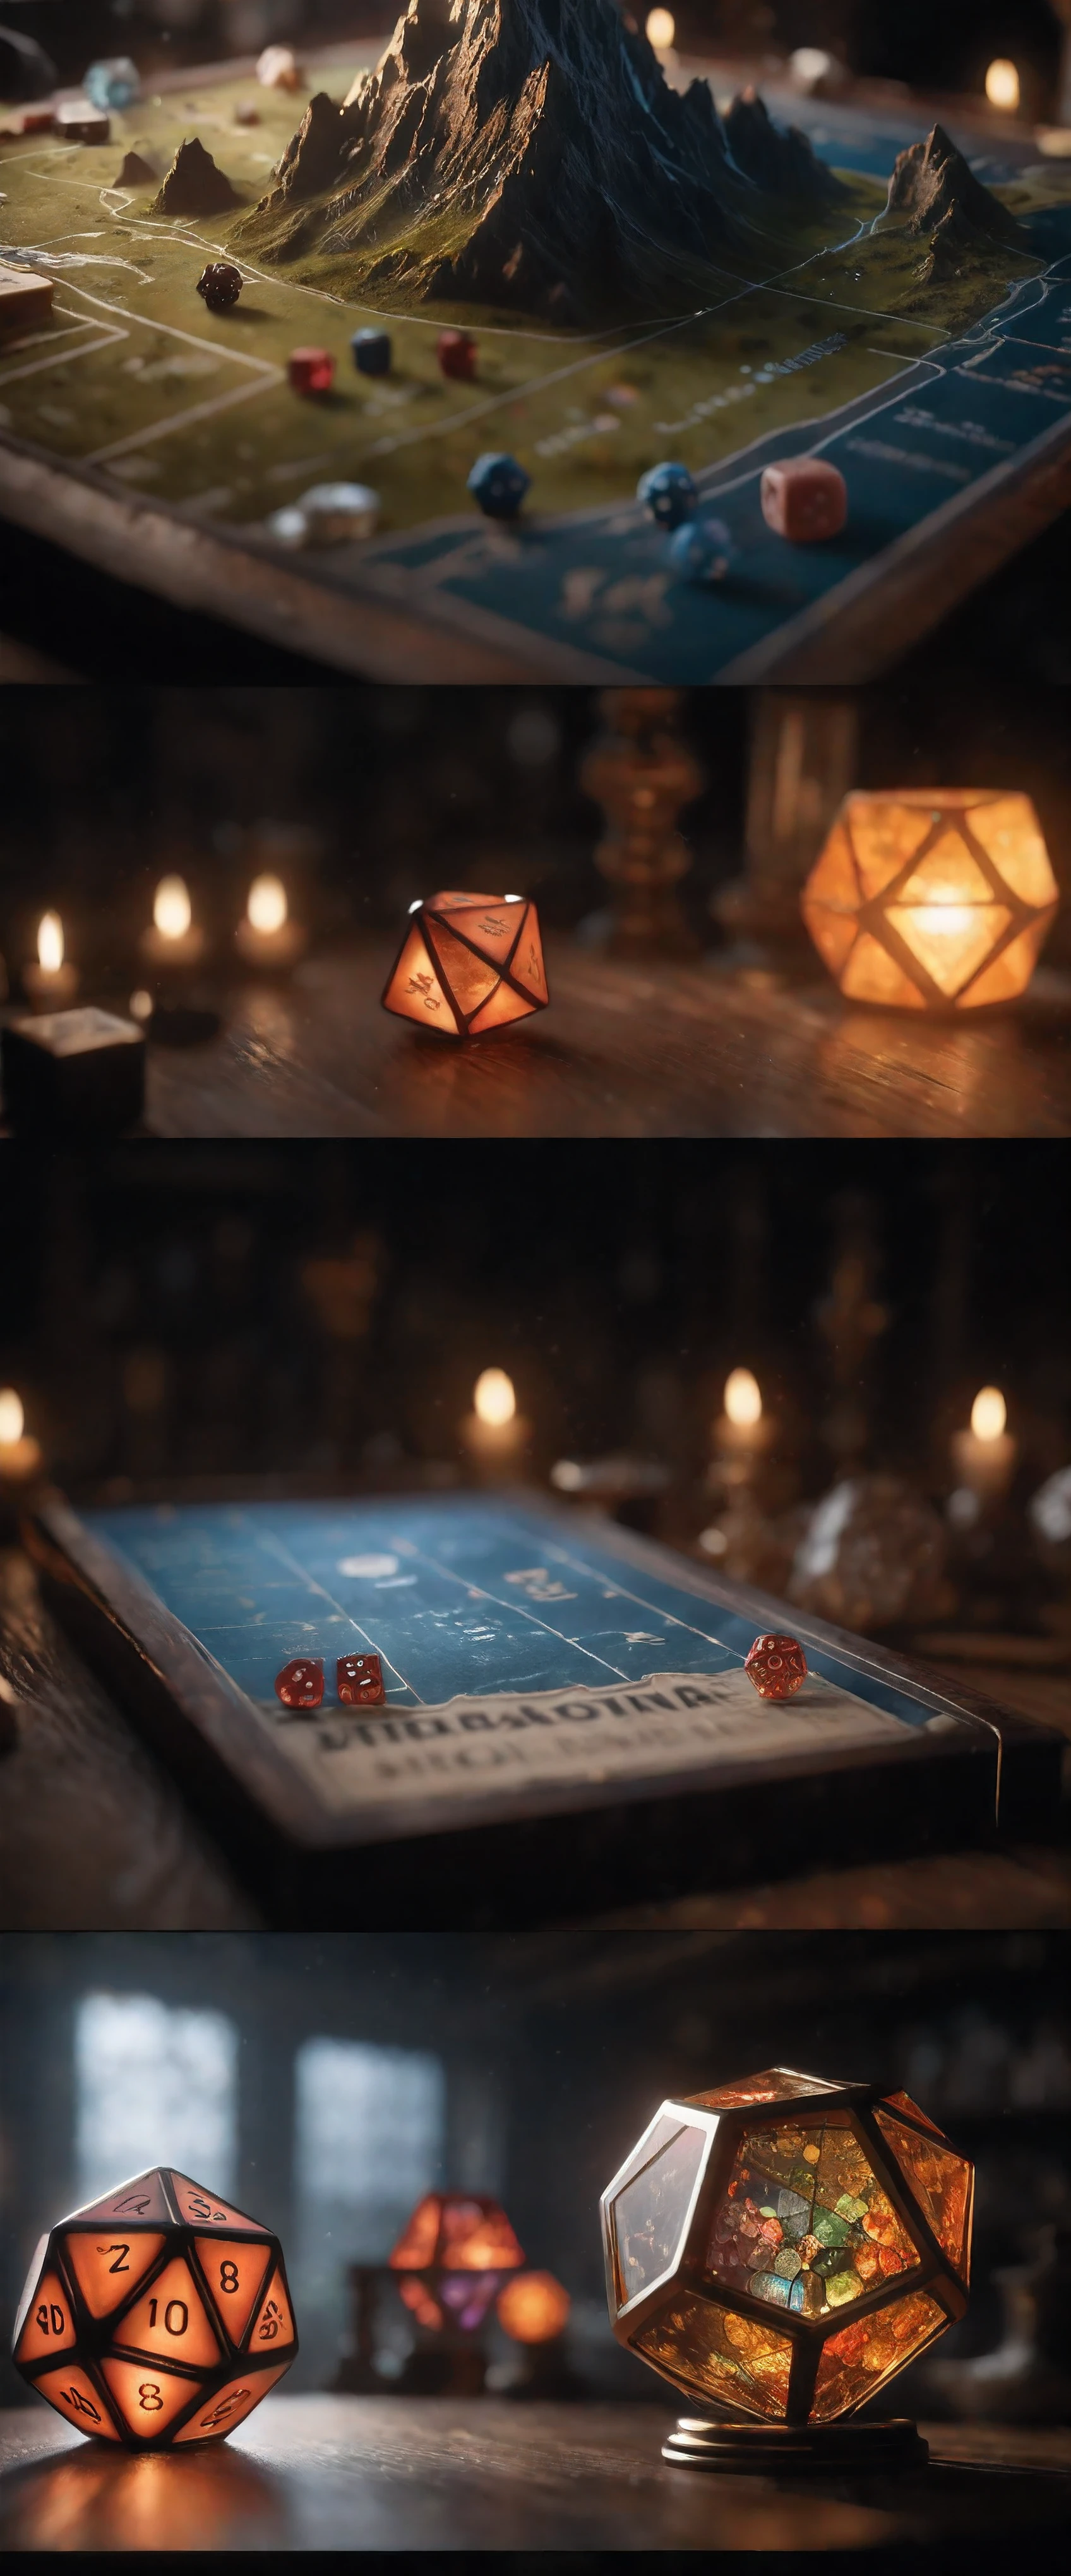 ((Masterpiece in maximum 16K resolution):1.6),((soft_color_photograpy:)1.5), ((Ultra-Detailed):1.4),((Movie-like still images and dynamic angles):1.3). | (Macro shot cinematic photo of a DnD table), (DnD tabletop map), (DnD dice), (macro lens), (DnD bookshelf), (DnD Posters), (luminous object), (DnD room), (shimmer), (aesthetic DnD vase), (visual experience),(Realism), (Realistic),award-winning graphics, dark shot, film grain, extremely detailed, Digital Art, rtx, Unreal Engine, scene concept anti glare effect, All captured with sharp focus. | Rendered in ultra-high definition with UHD and retina quality, this masterpiece ensures anatomical correctness and textured skin with super detail. With a focus on high quality and accuracy, this award-winning portrayal captures every nuance in stunning 16k resolution, immersing viewers in its lifelike depiction. | ((perfect_composition, perfect_design, perfect_layout, perfect_detail, ultra_detailed)), ((enhance_all, fix_everything)), More Detail, Enhance.